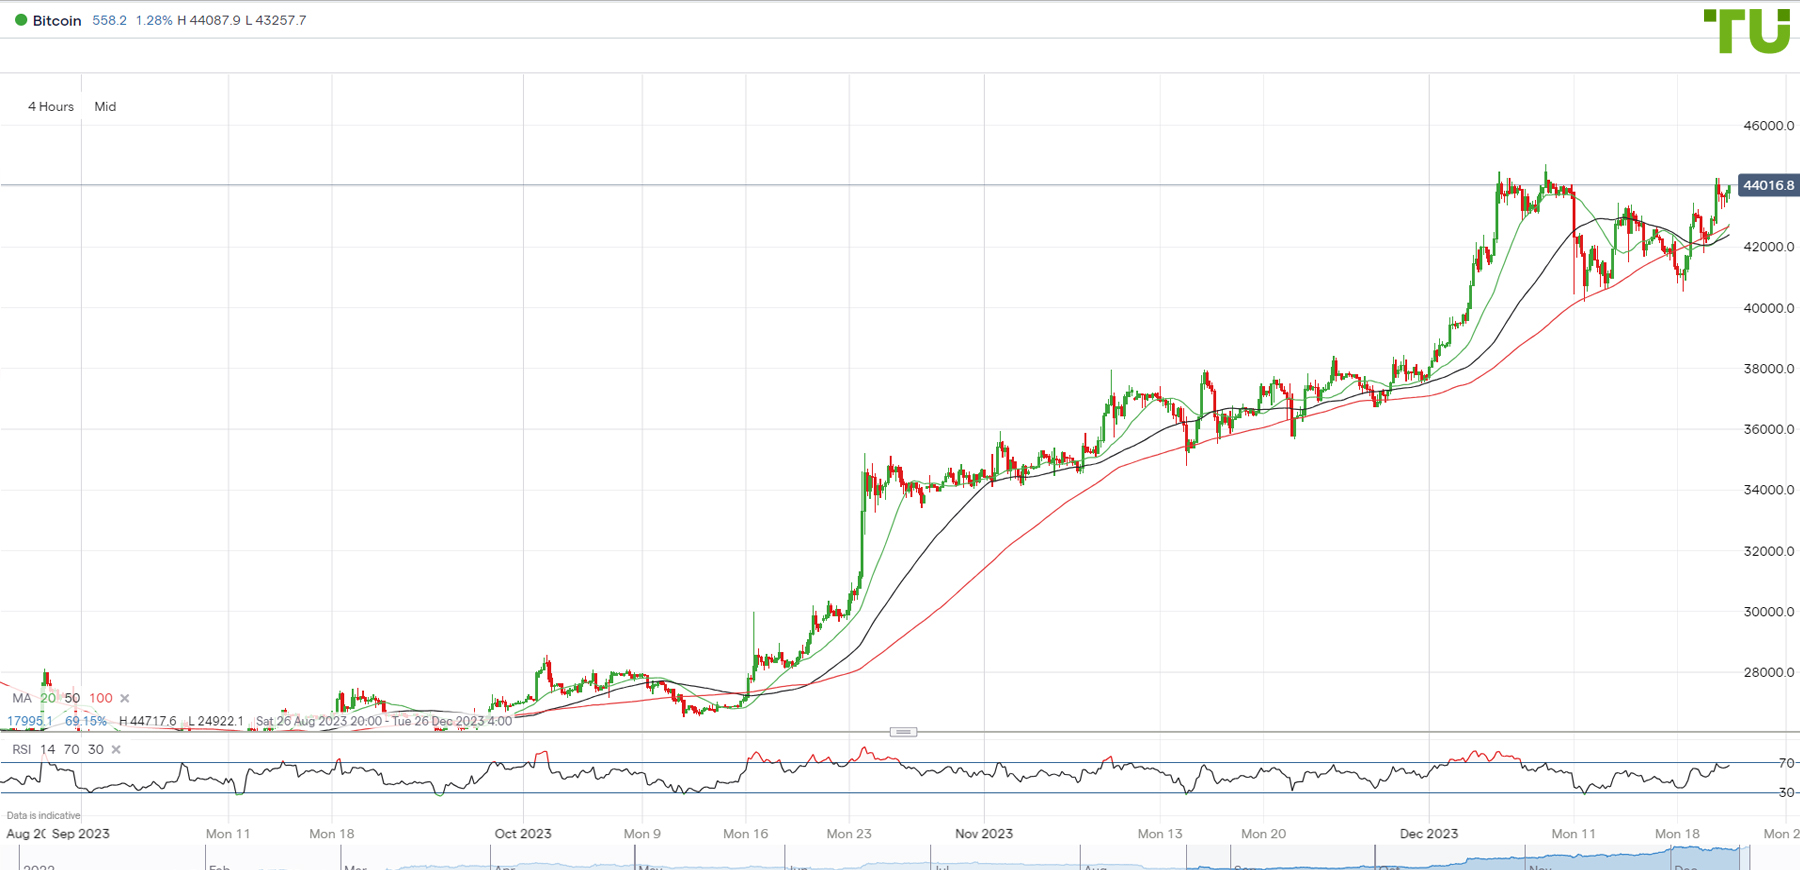 BTC/USD is being bought back on falls